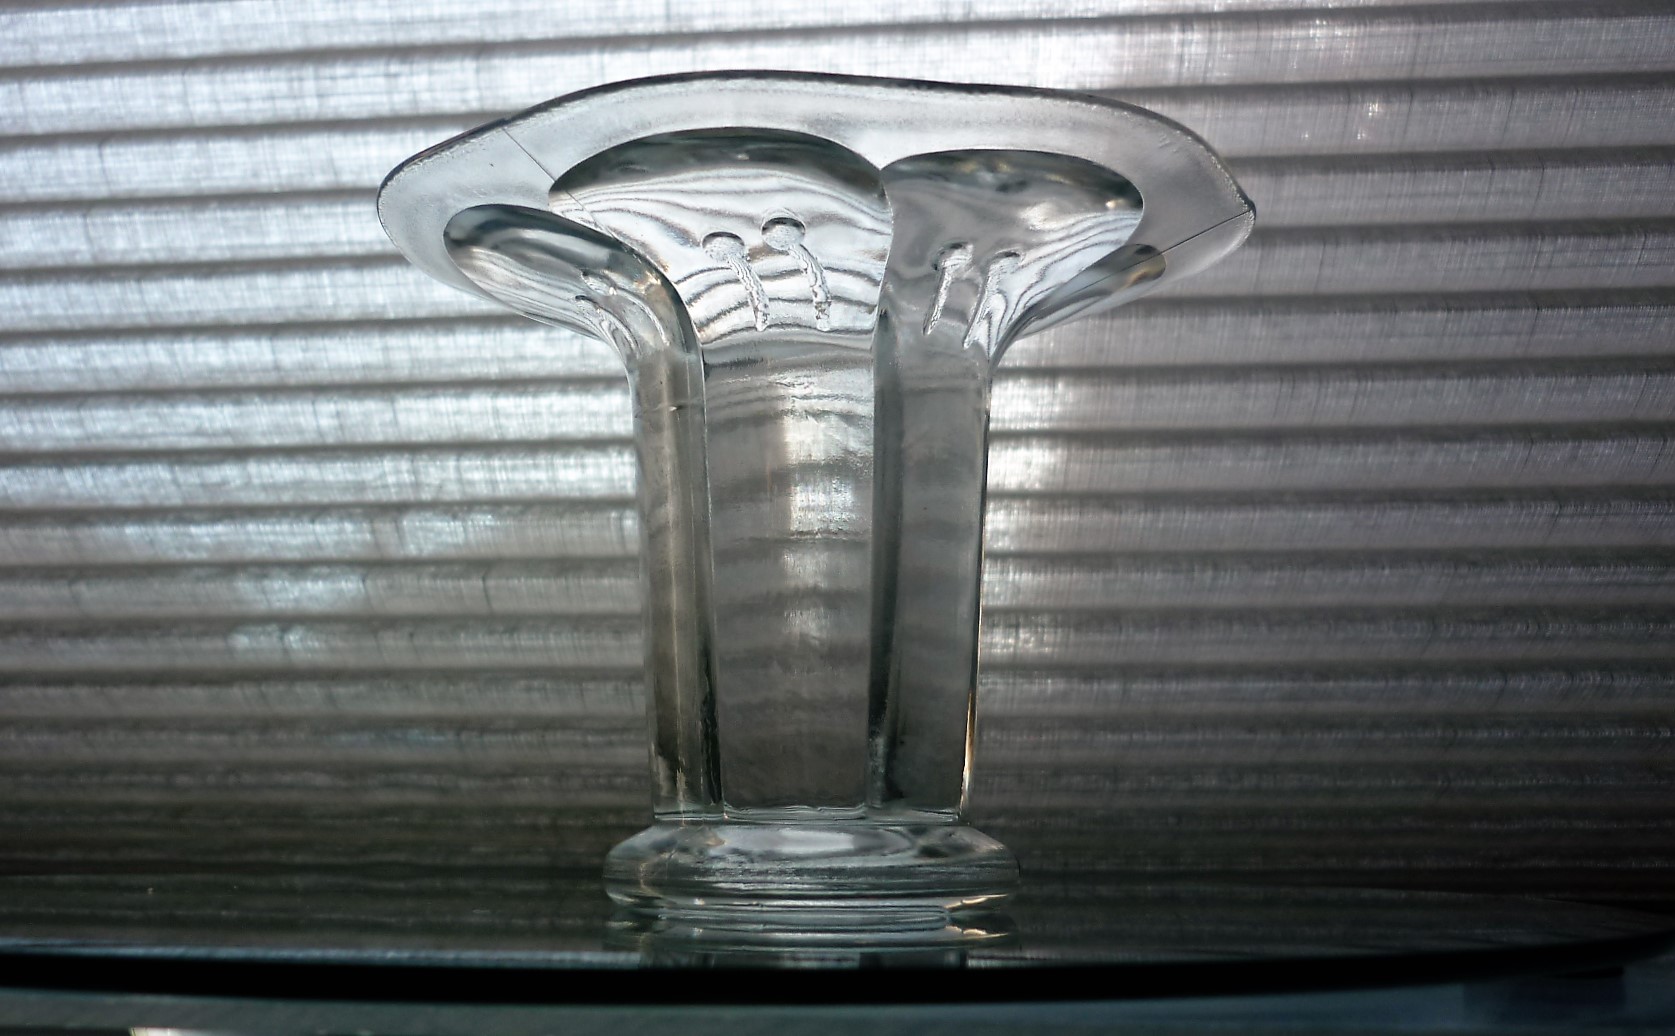 1970s vintage Nuutajarvi of Finland "Lumme/Water Lily" Candle Holder designed by Kerttu Nurminen